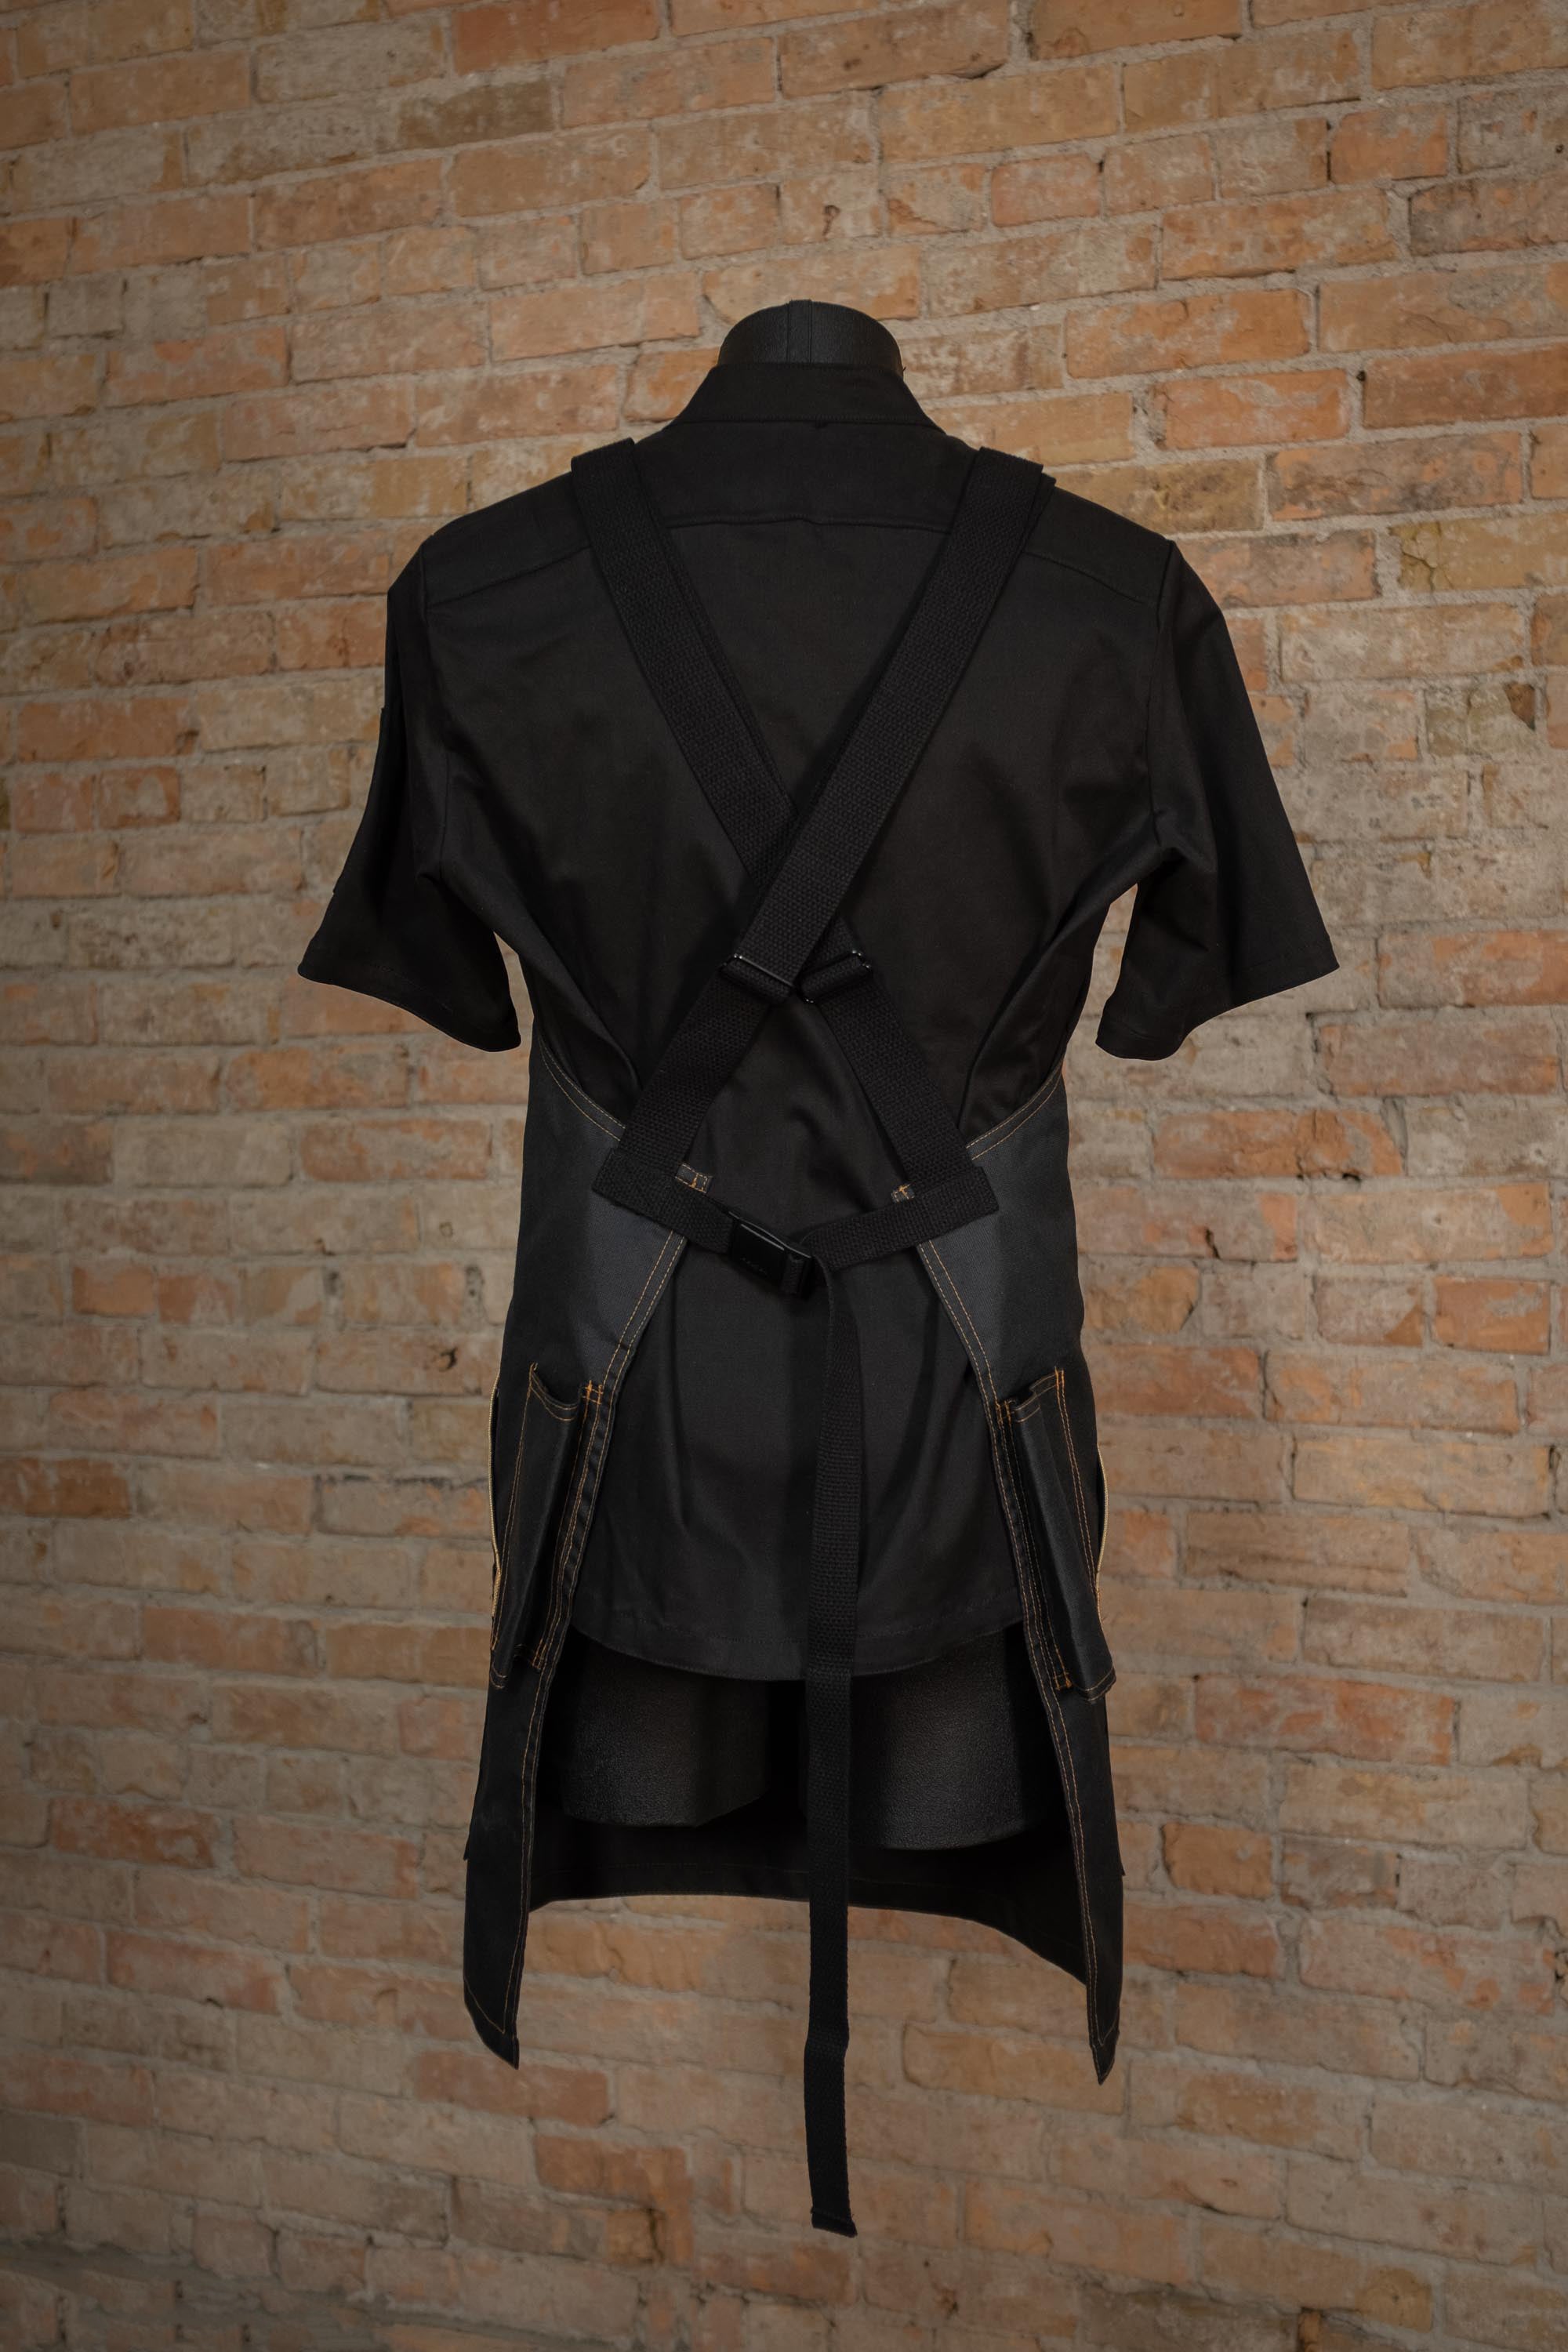 Protective Kevlar cross back apron from Craftmade Aprons, Minnesota, displayed on a mannequin over a black chef coat. The BAMF apron is shown from the back, displaying the black cross back strapping.